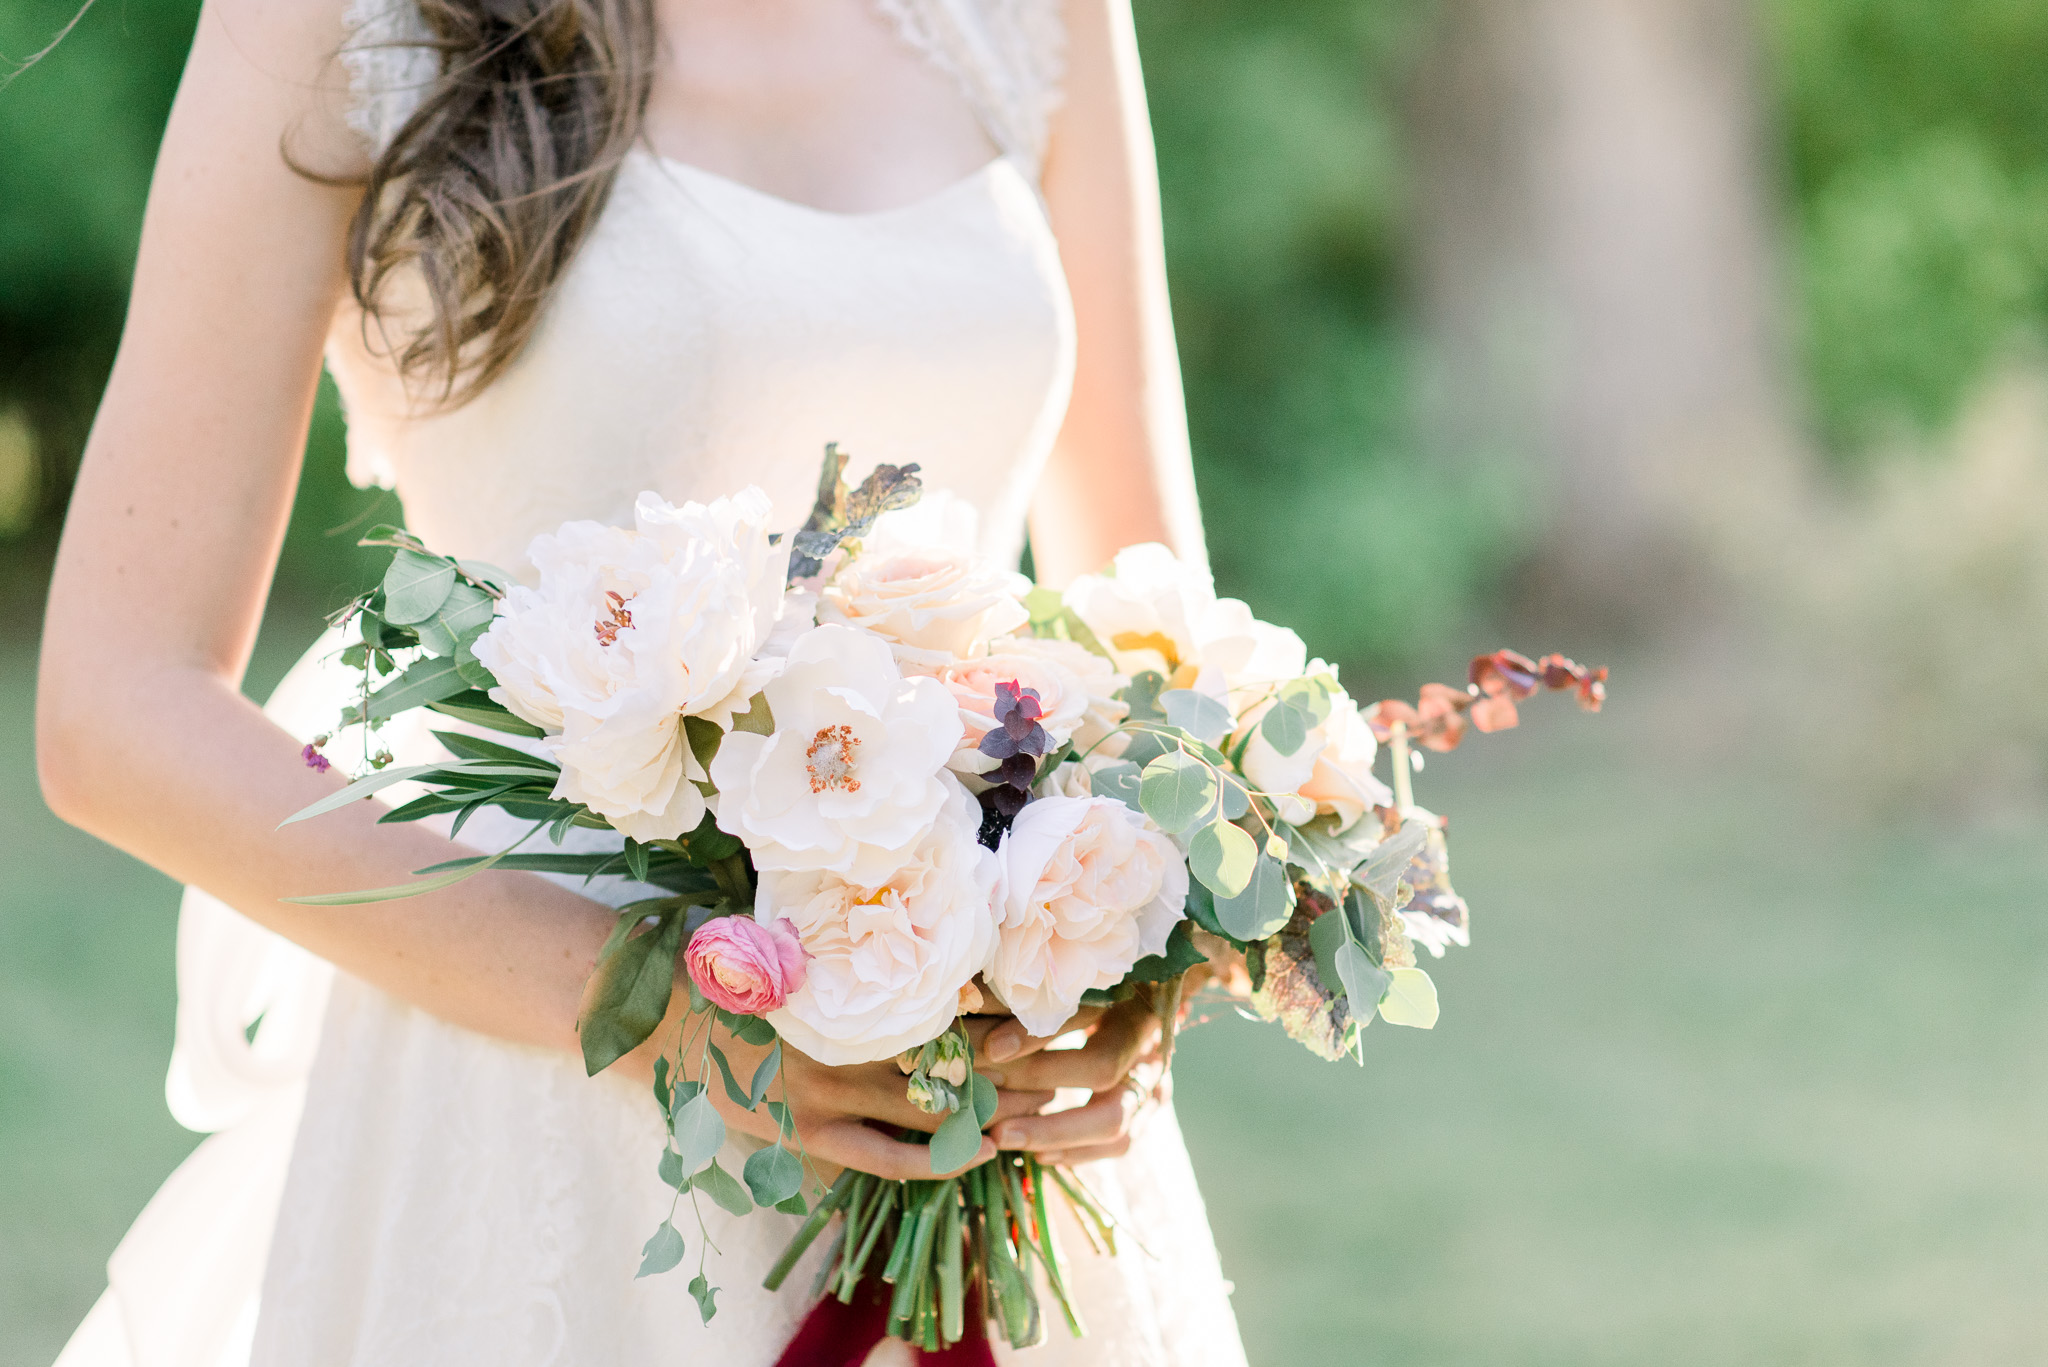 Medella Vina Wedding Photo of Classic White Bride and Bouquet | Tucson Wedding Photographer | West End Photography